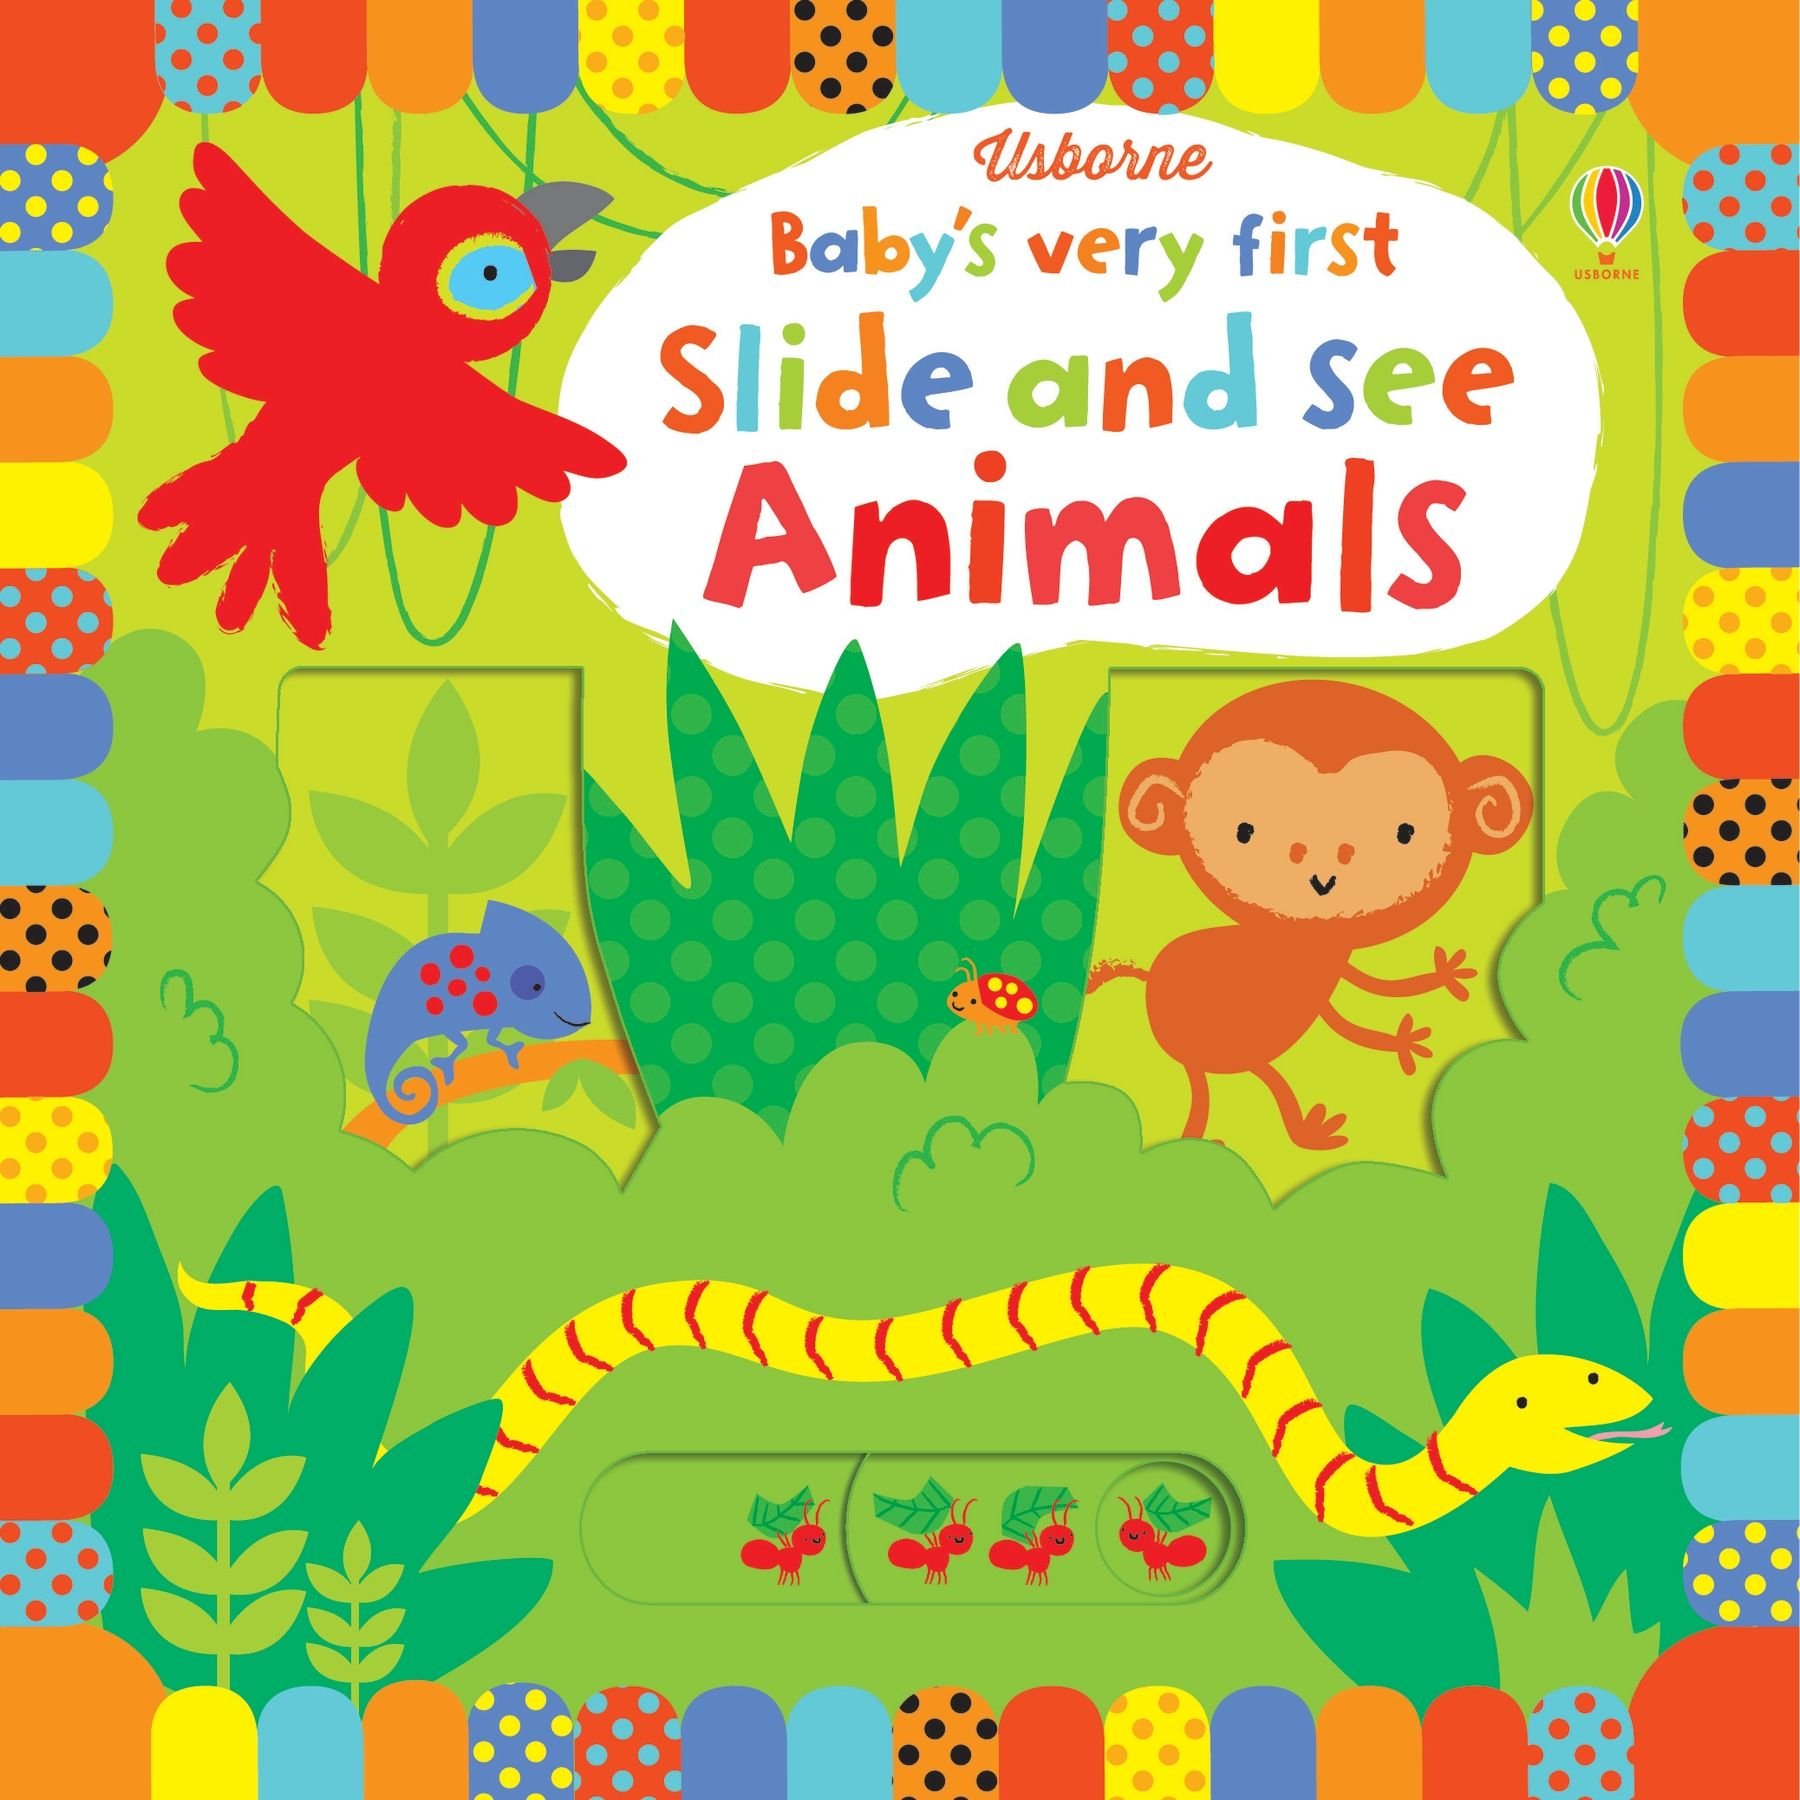 Slide and see animals